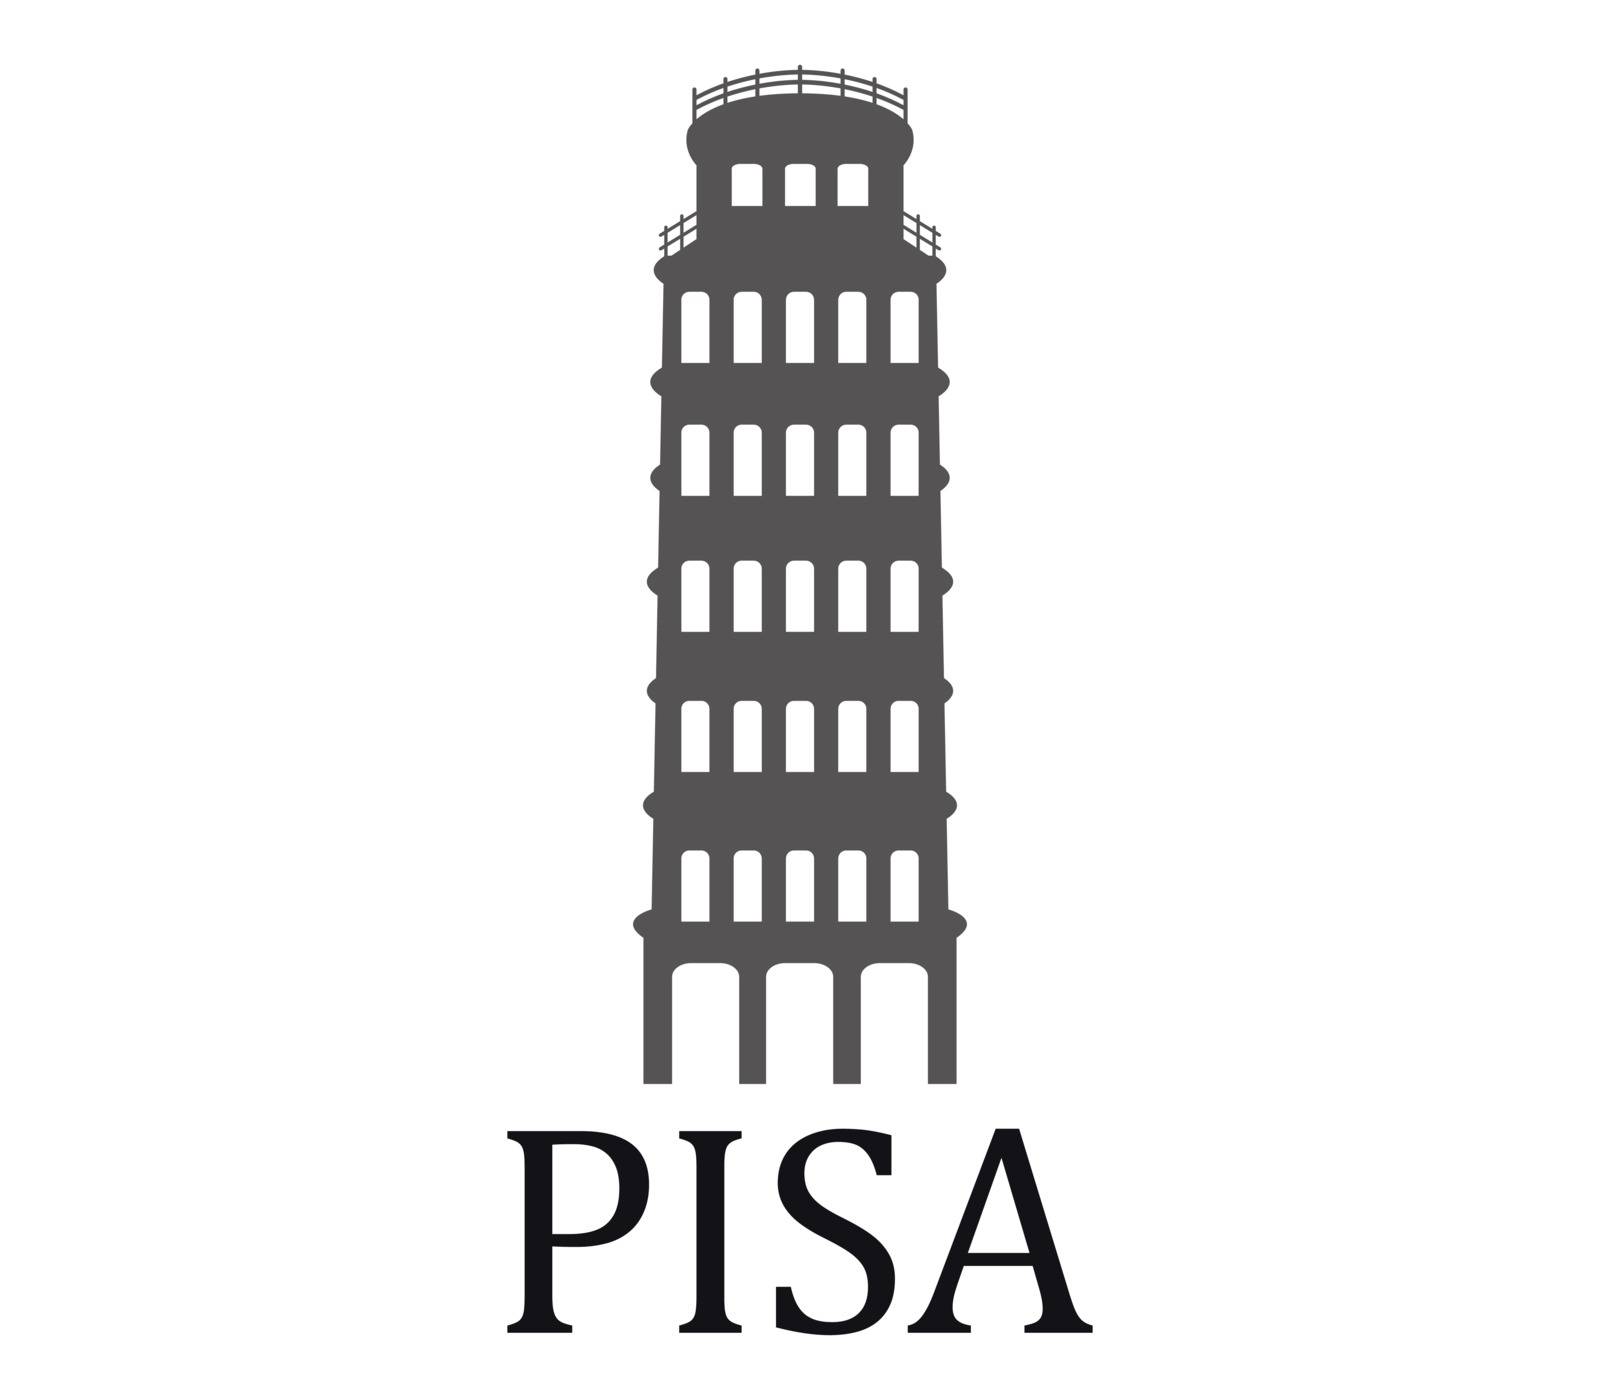 Pisa tower icon by Mark1987